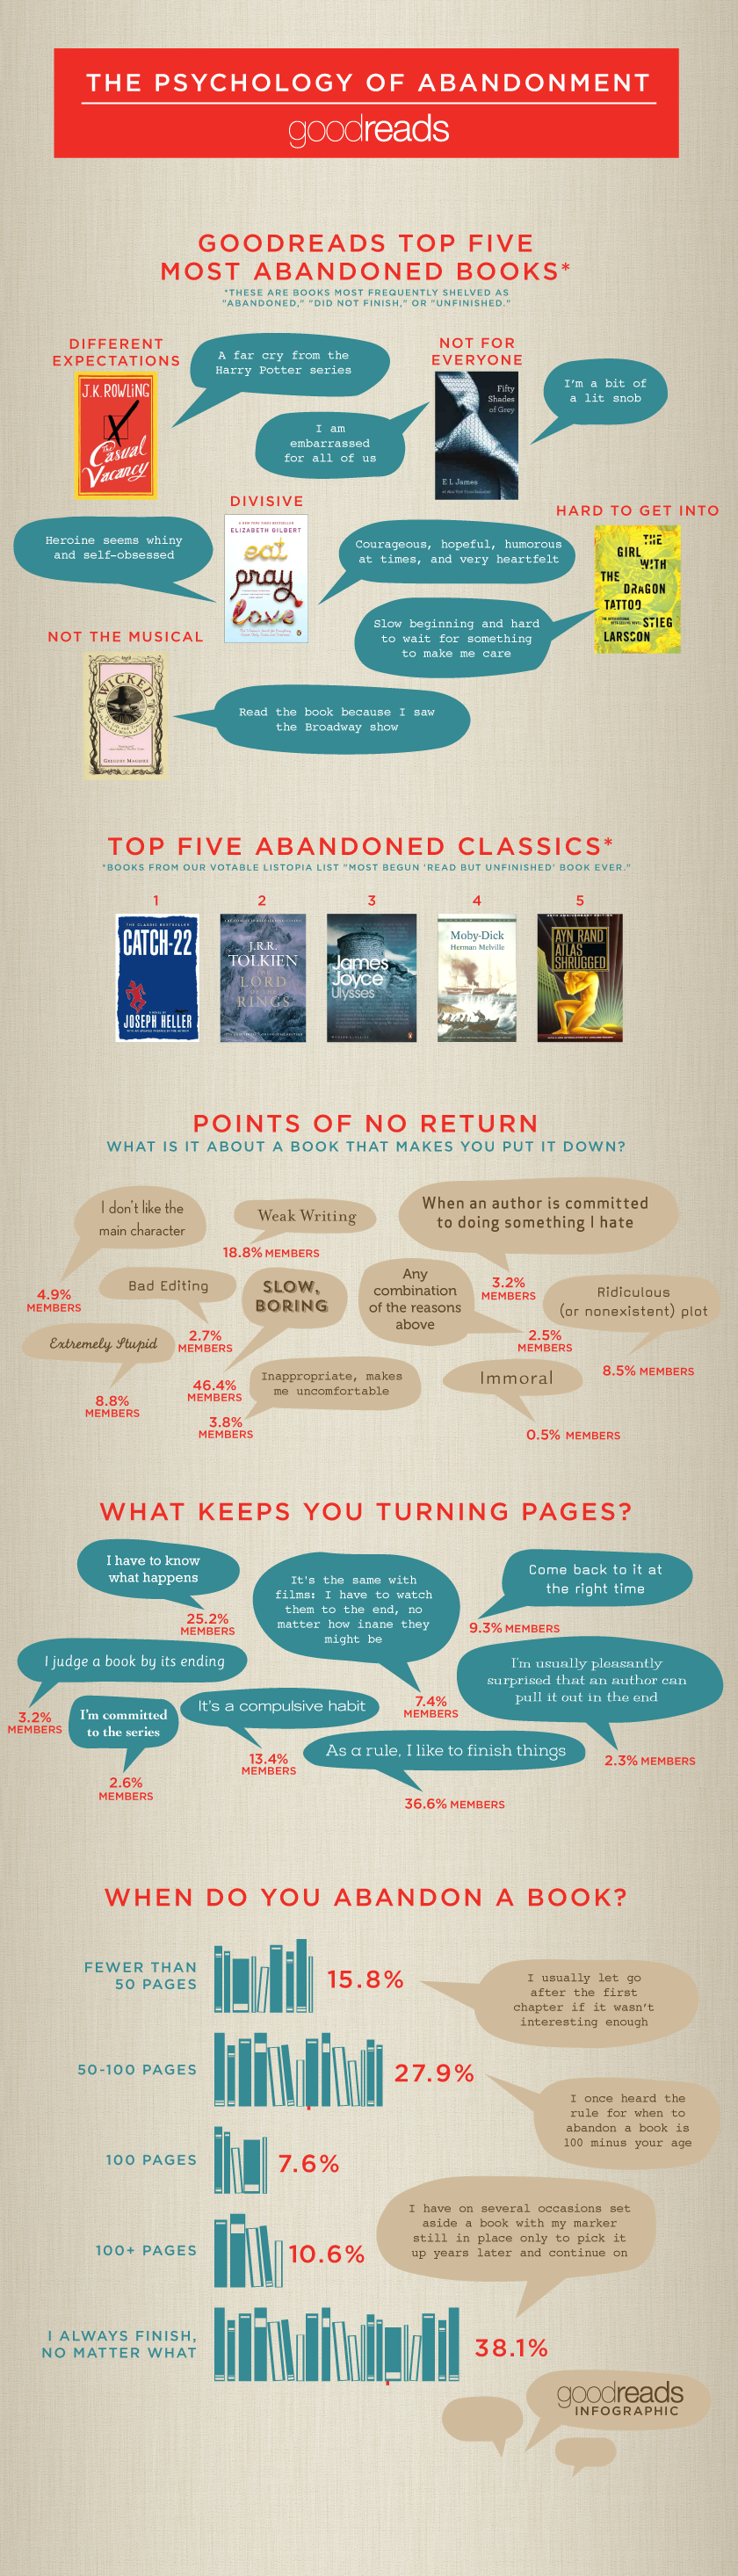 Infographic by Goodreads on book abandonment